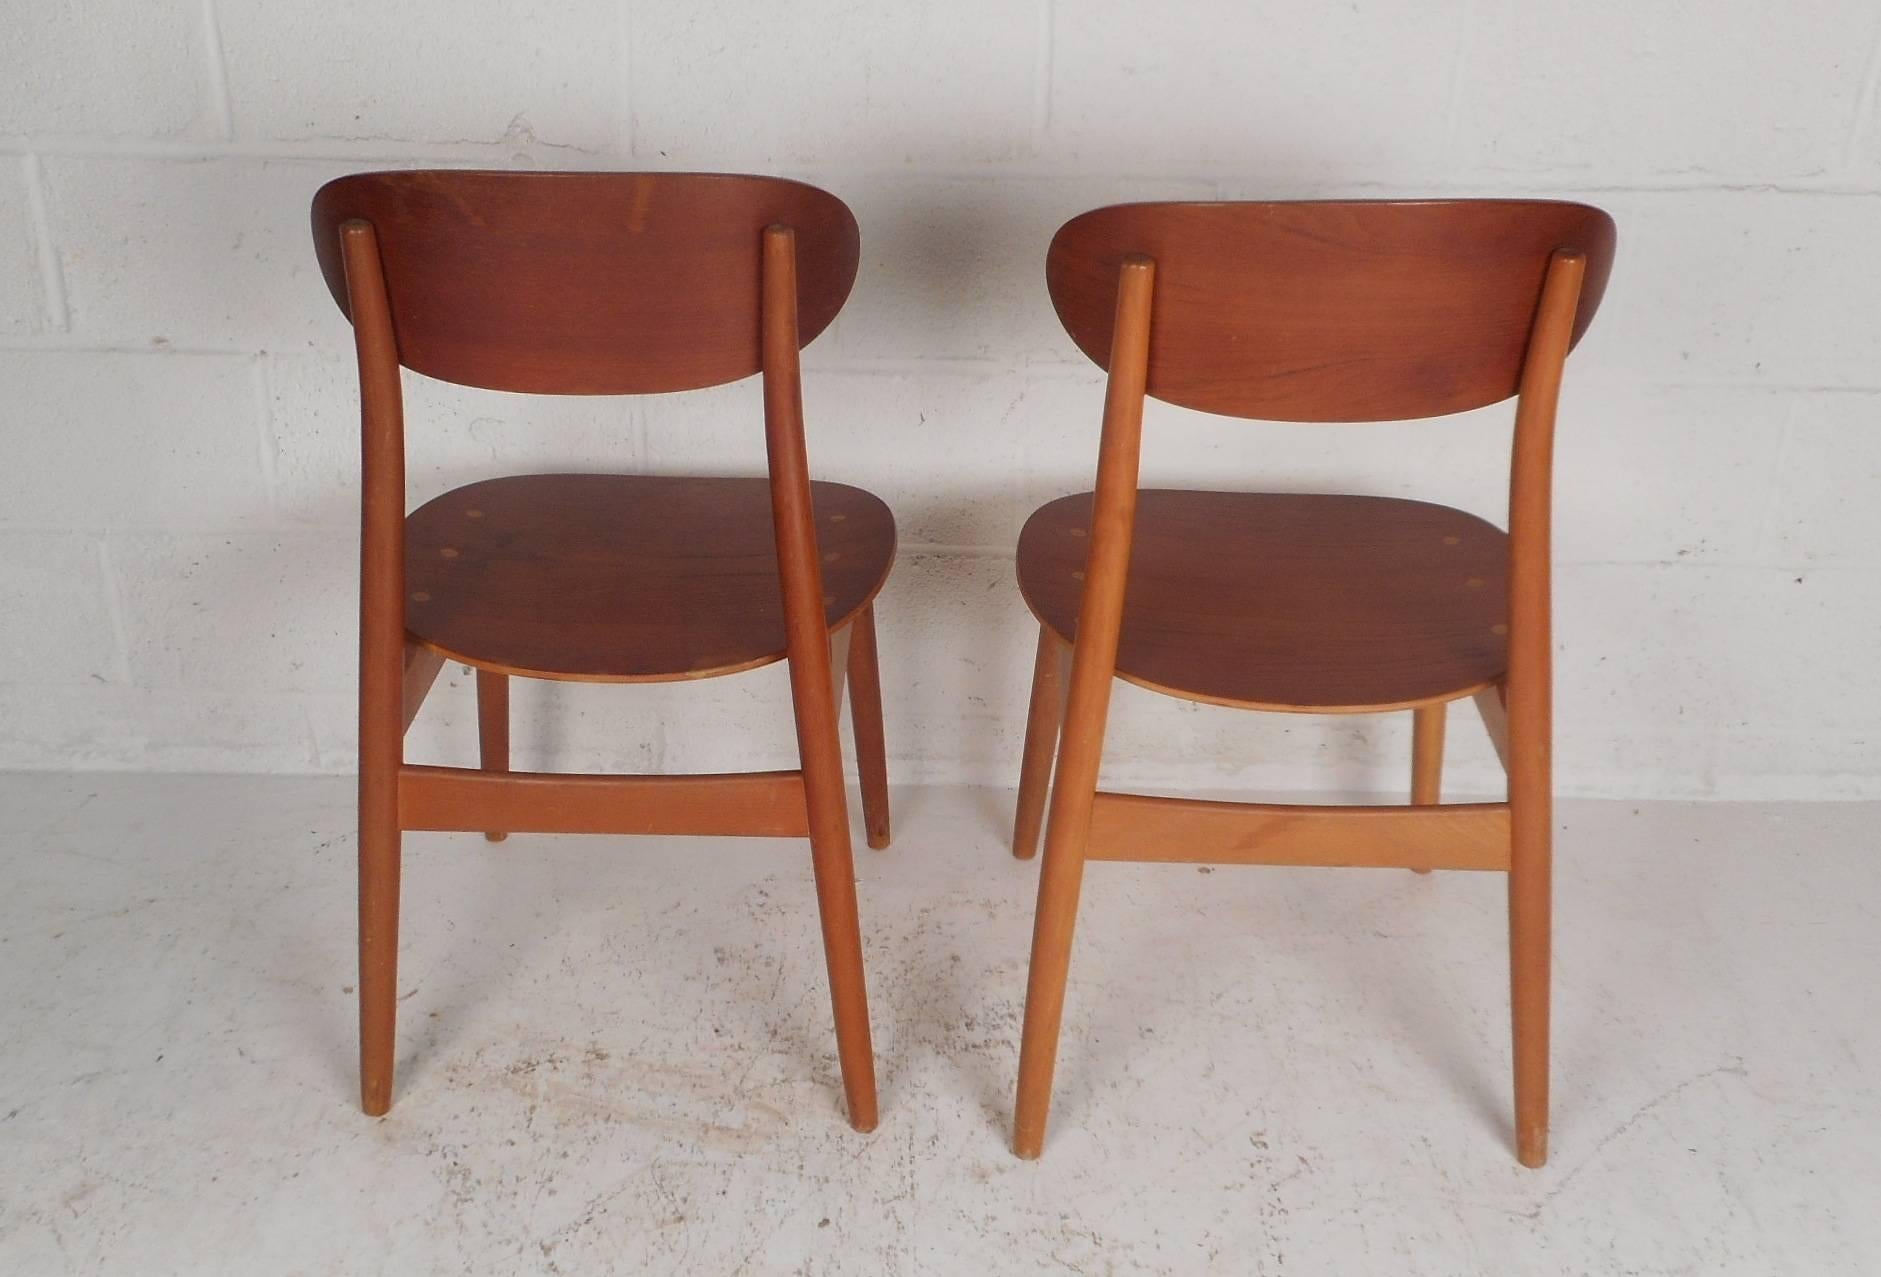 Pair of Mid-Century Modern Danish Chairs In Good Condition For Sale In Brooklyn, NY